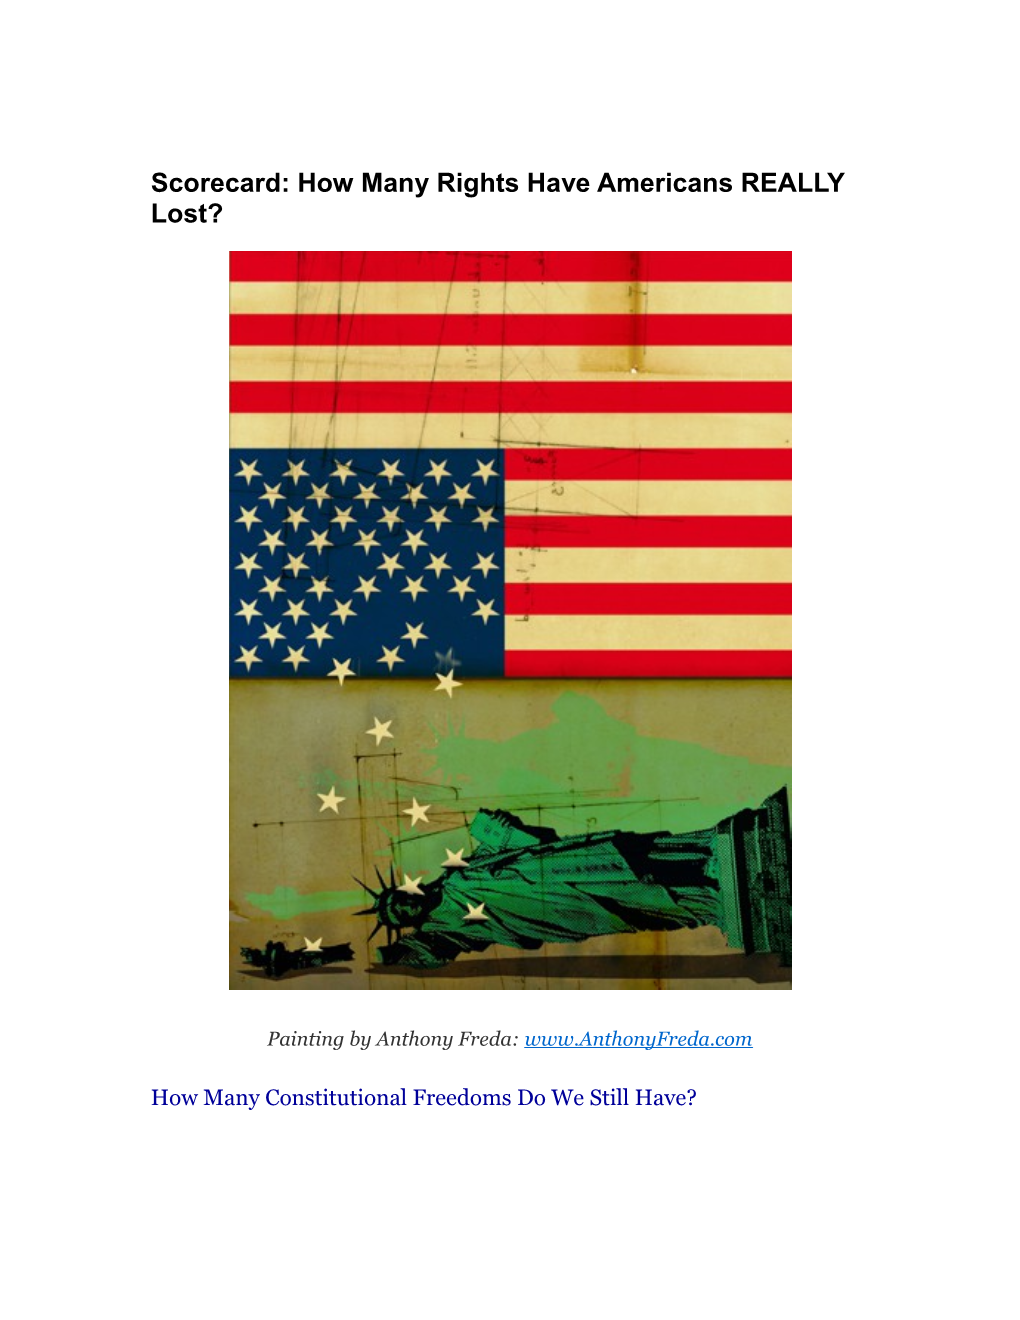 Scorecard: How Many Rights Have Americans REALLY Lost